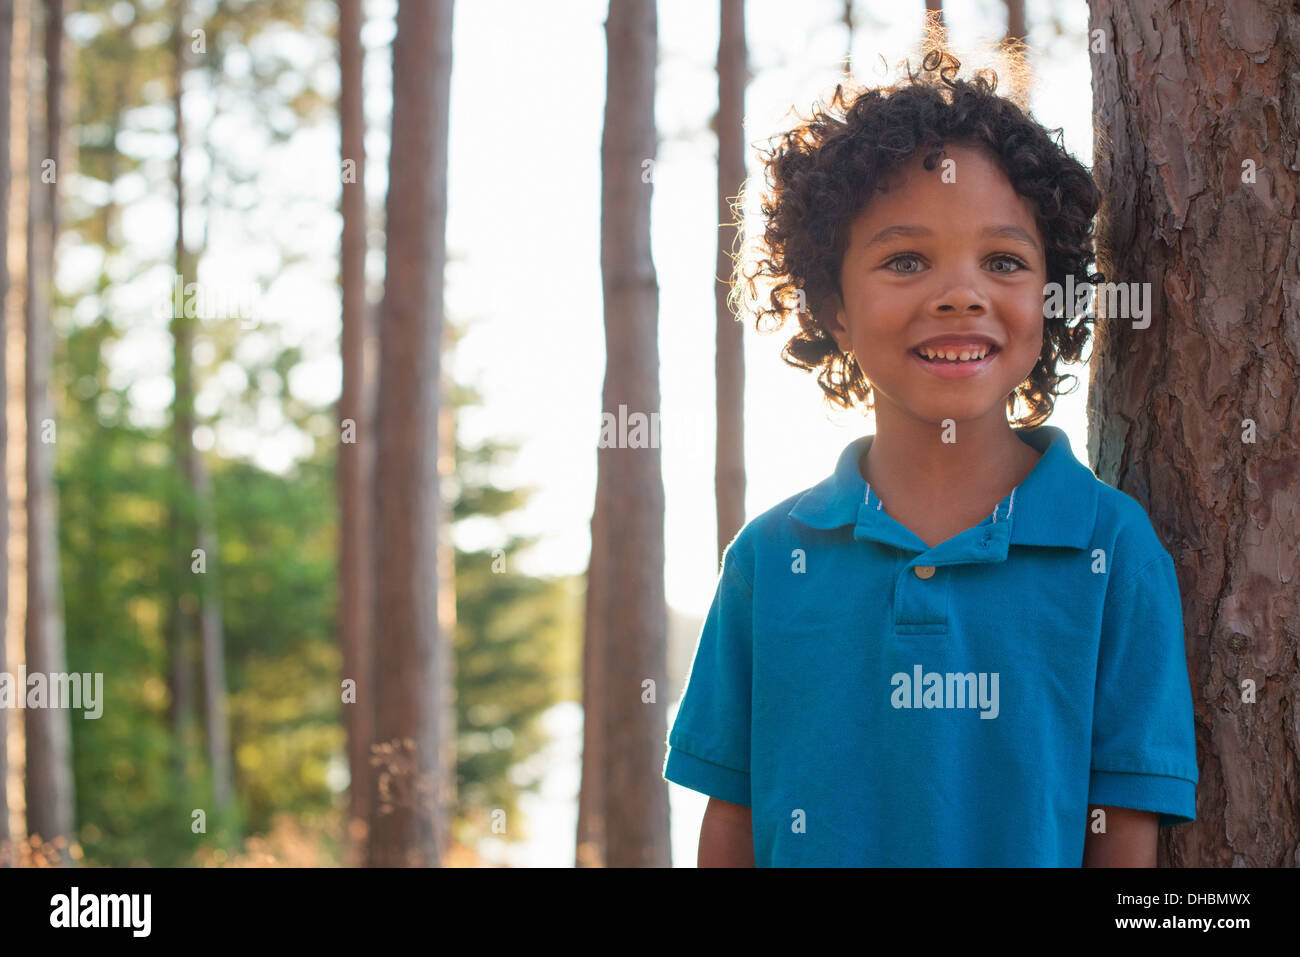 Trees on the shores of a lake. A child standing among the trees. Stock Photo